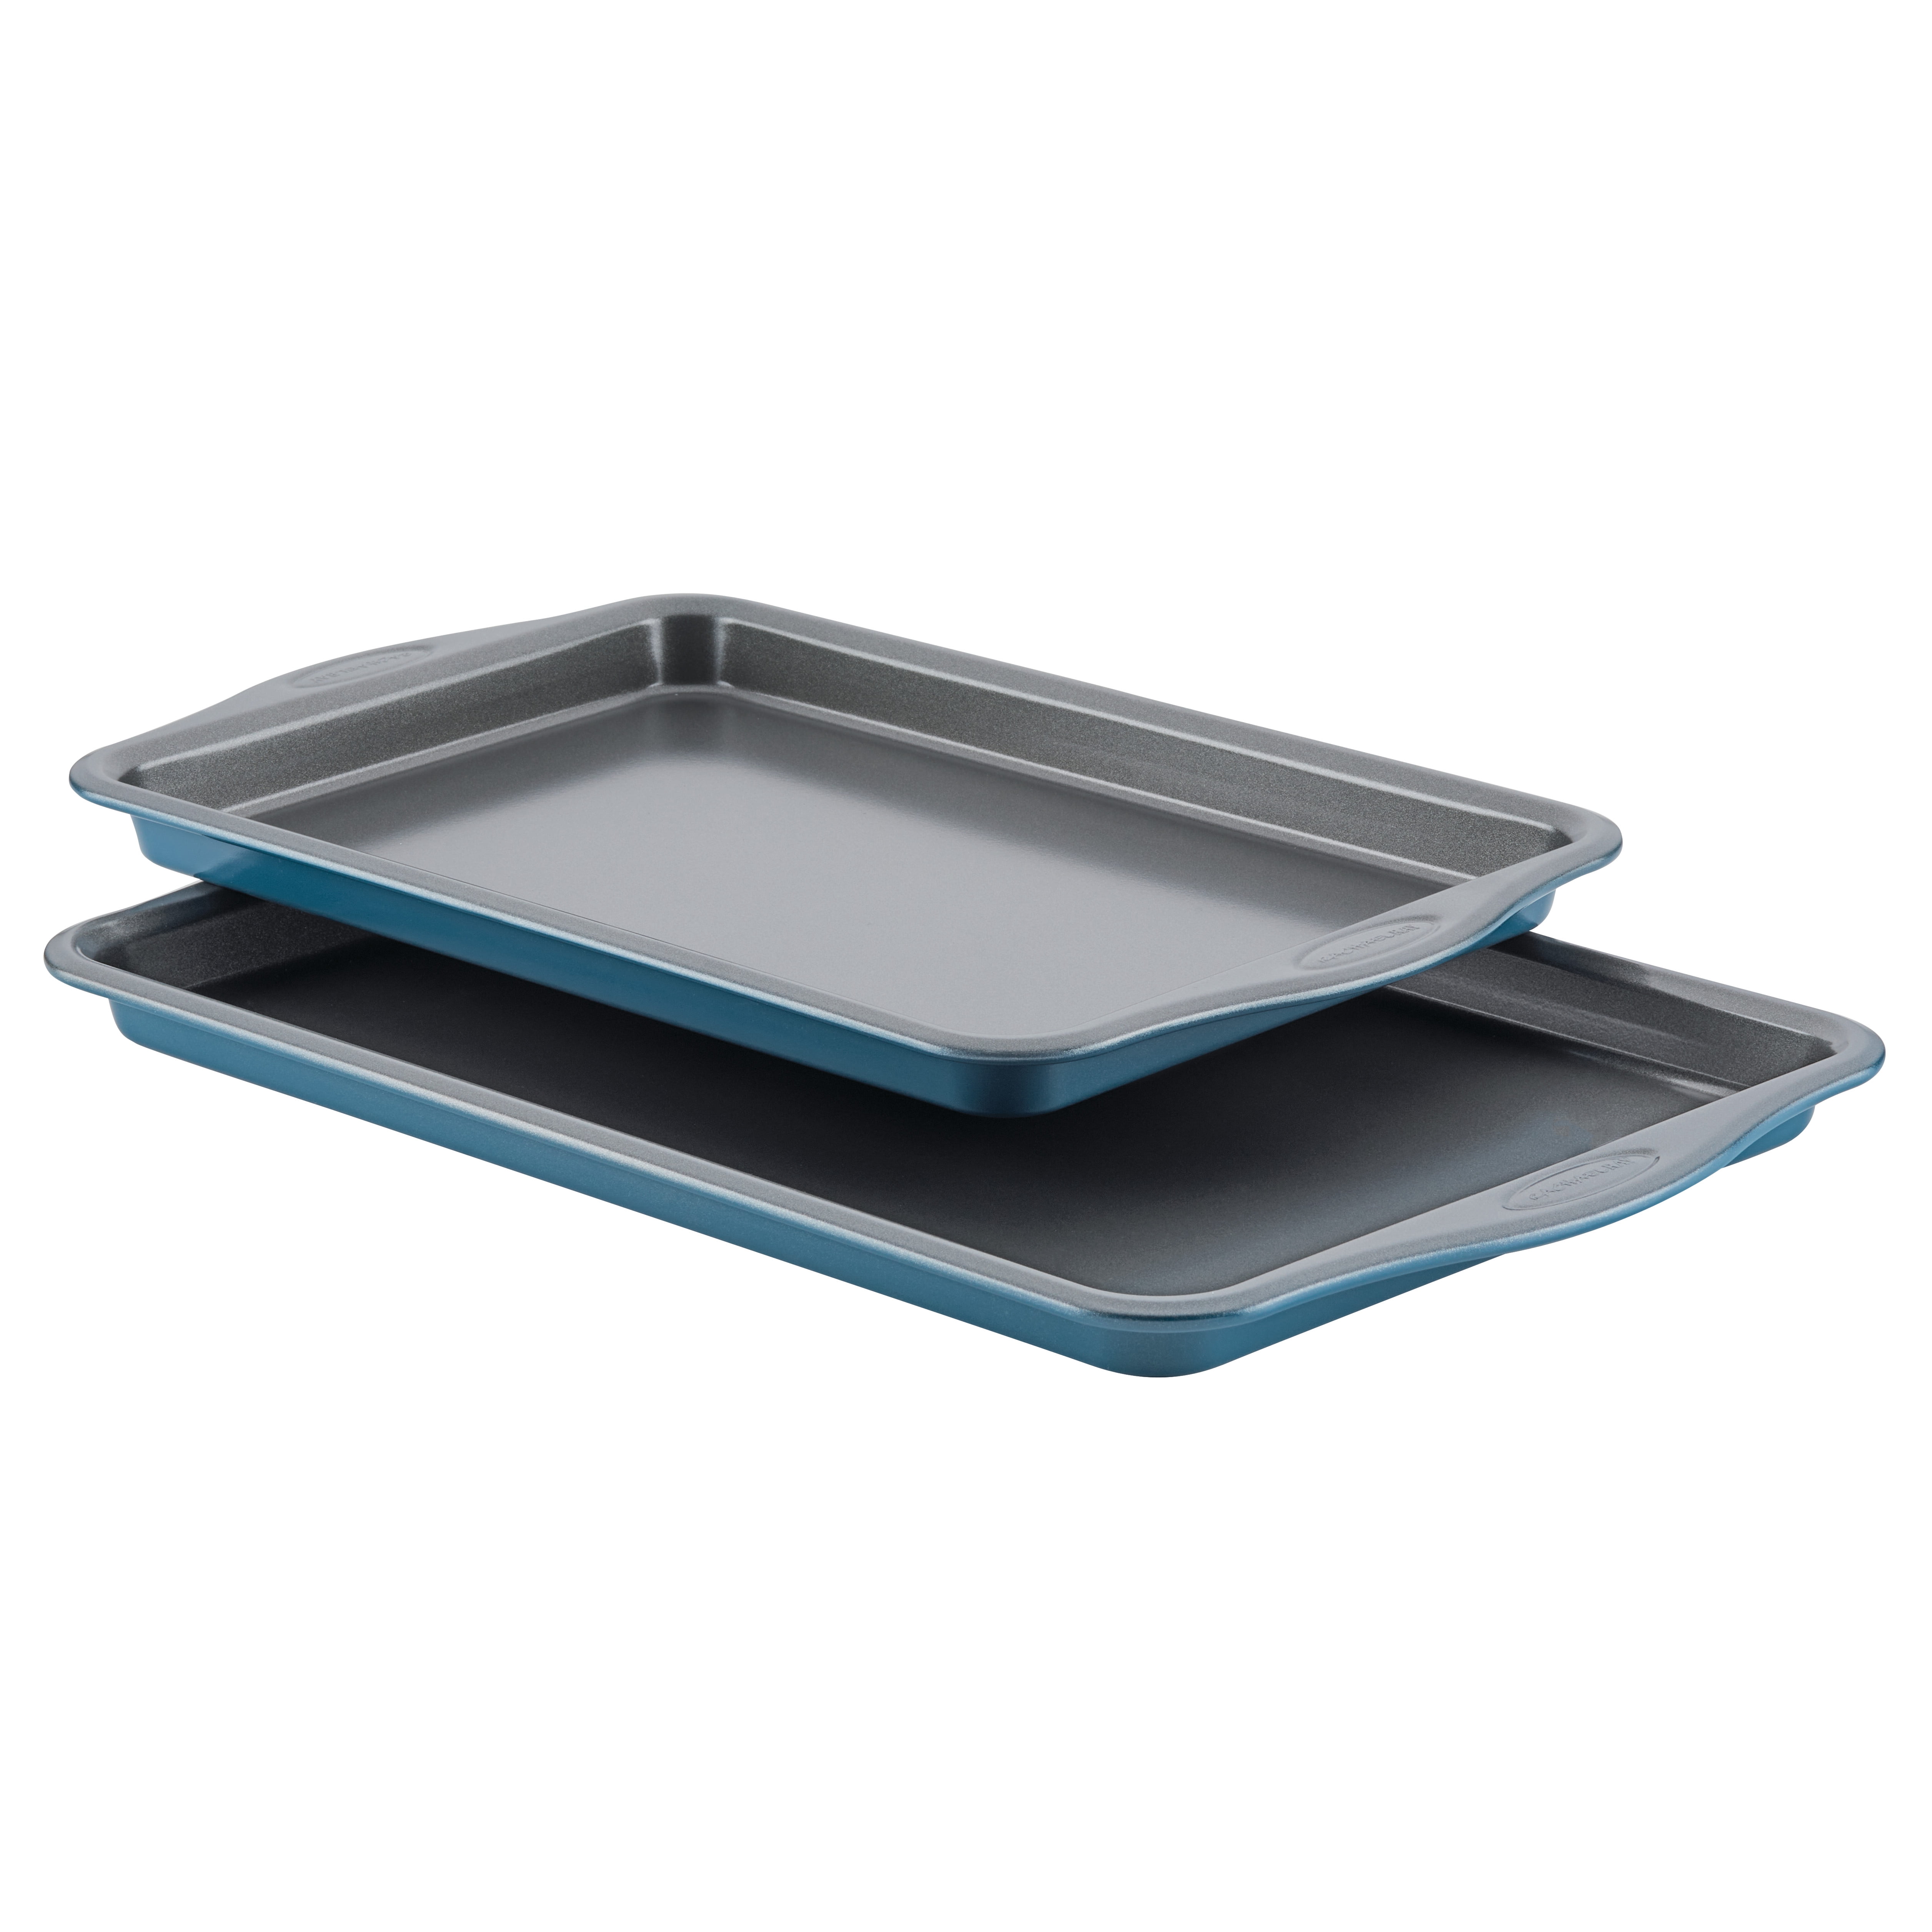 Rachael Ray 47578 Cucina Nonstick Bakeware Set with Grips Includes Nonstick  Bread Pan, Baking Sheet, Cookie Sheet, Baking Pans, Cake Pan and Muffin